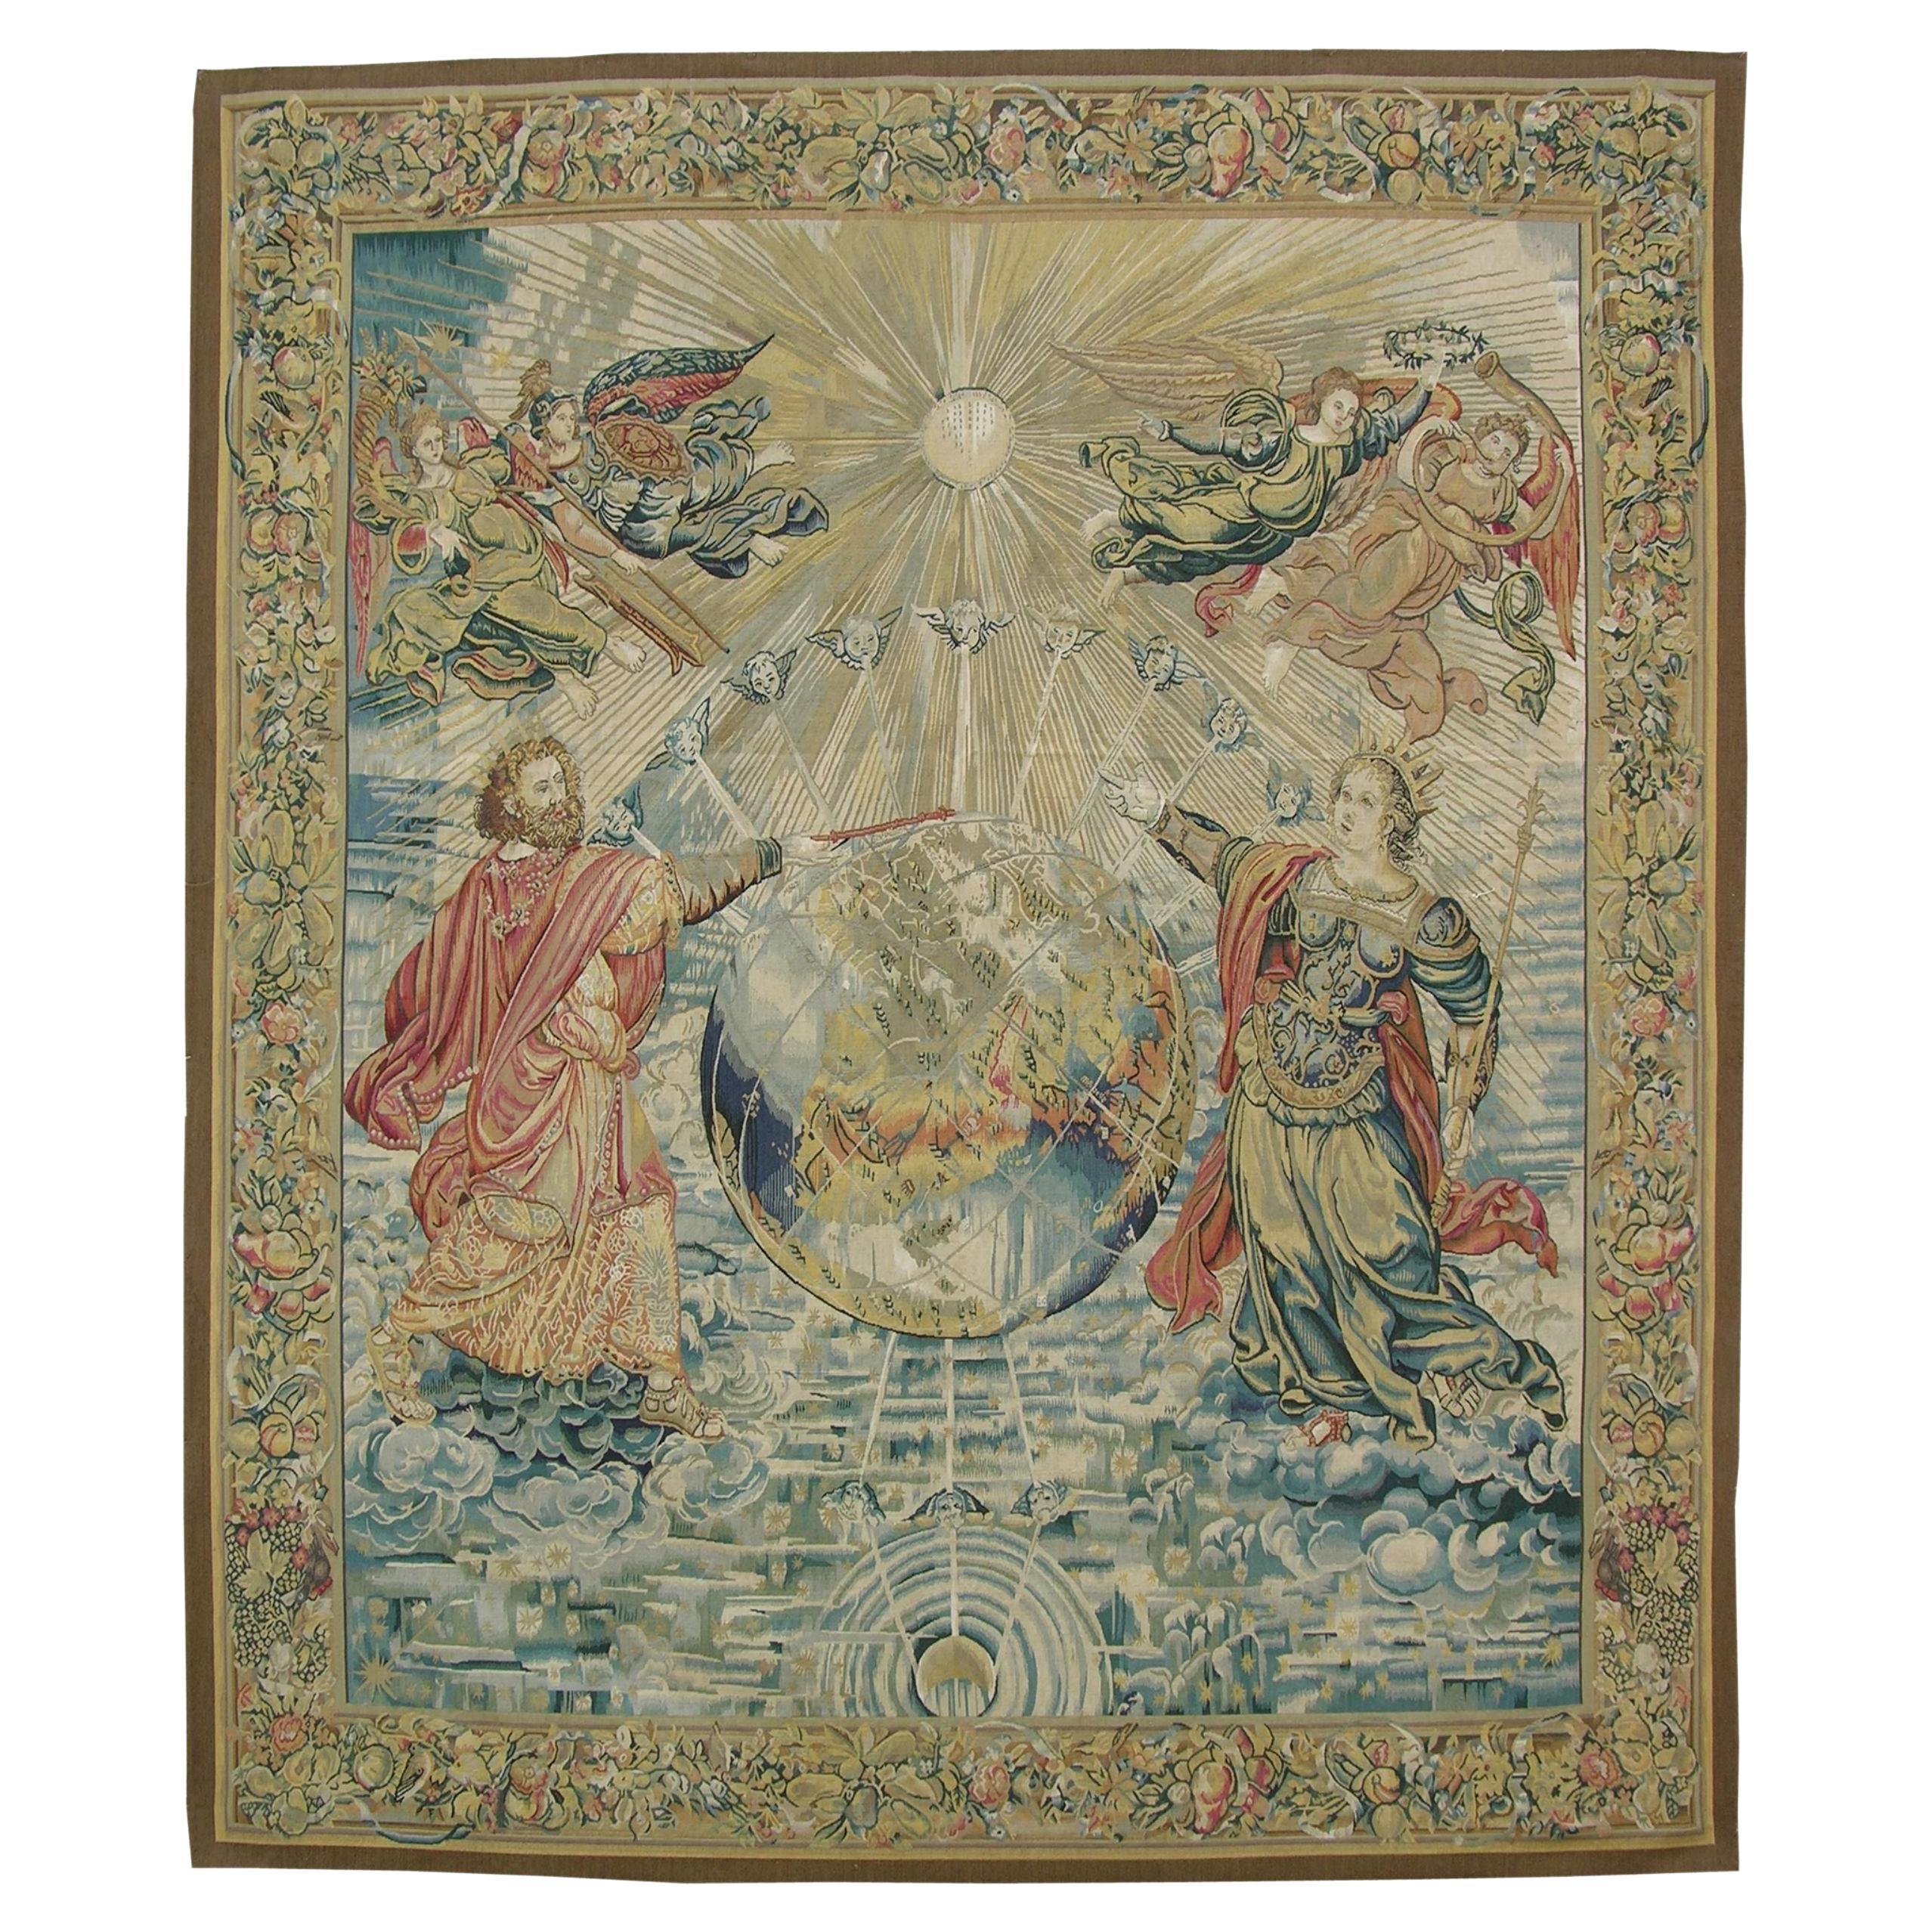 Vintage Tapestry Depicting a Royal Ceremony 7' X 8'